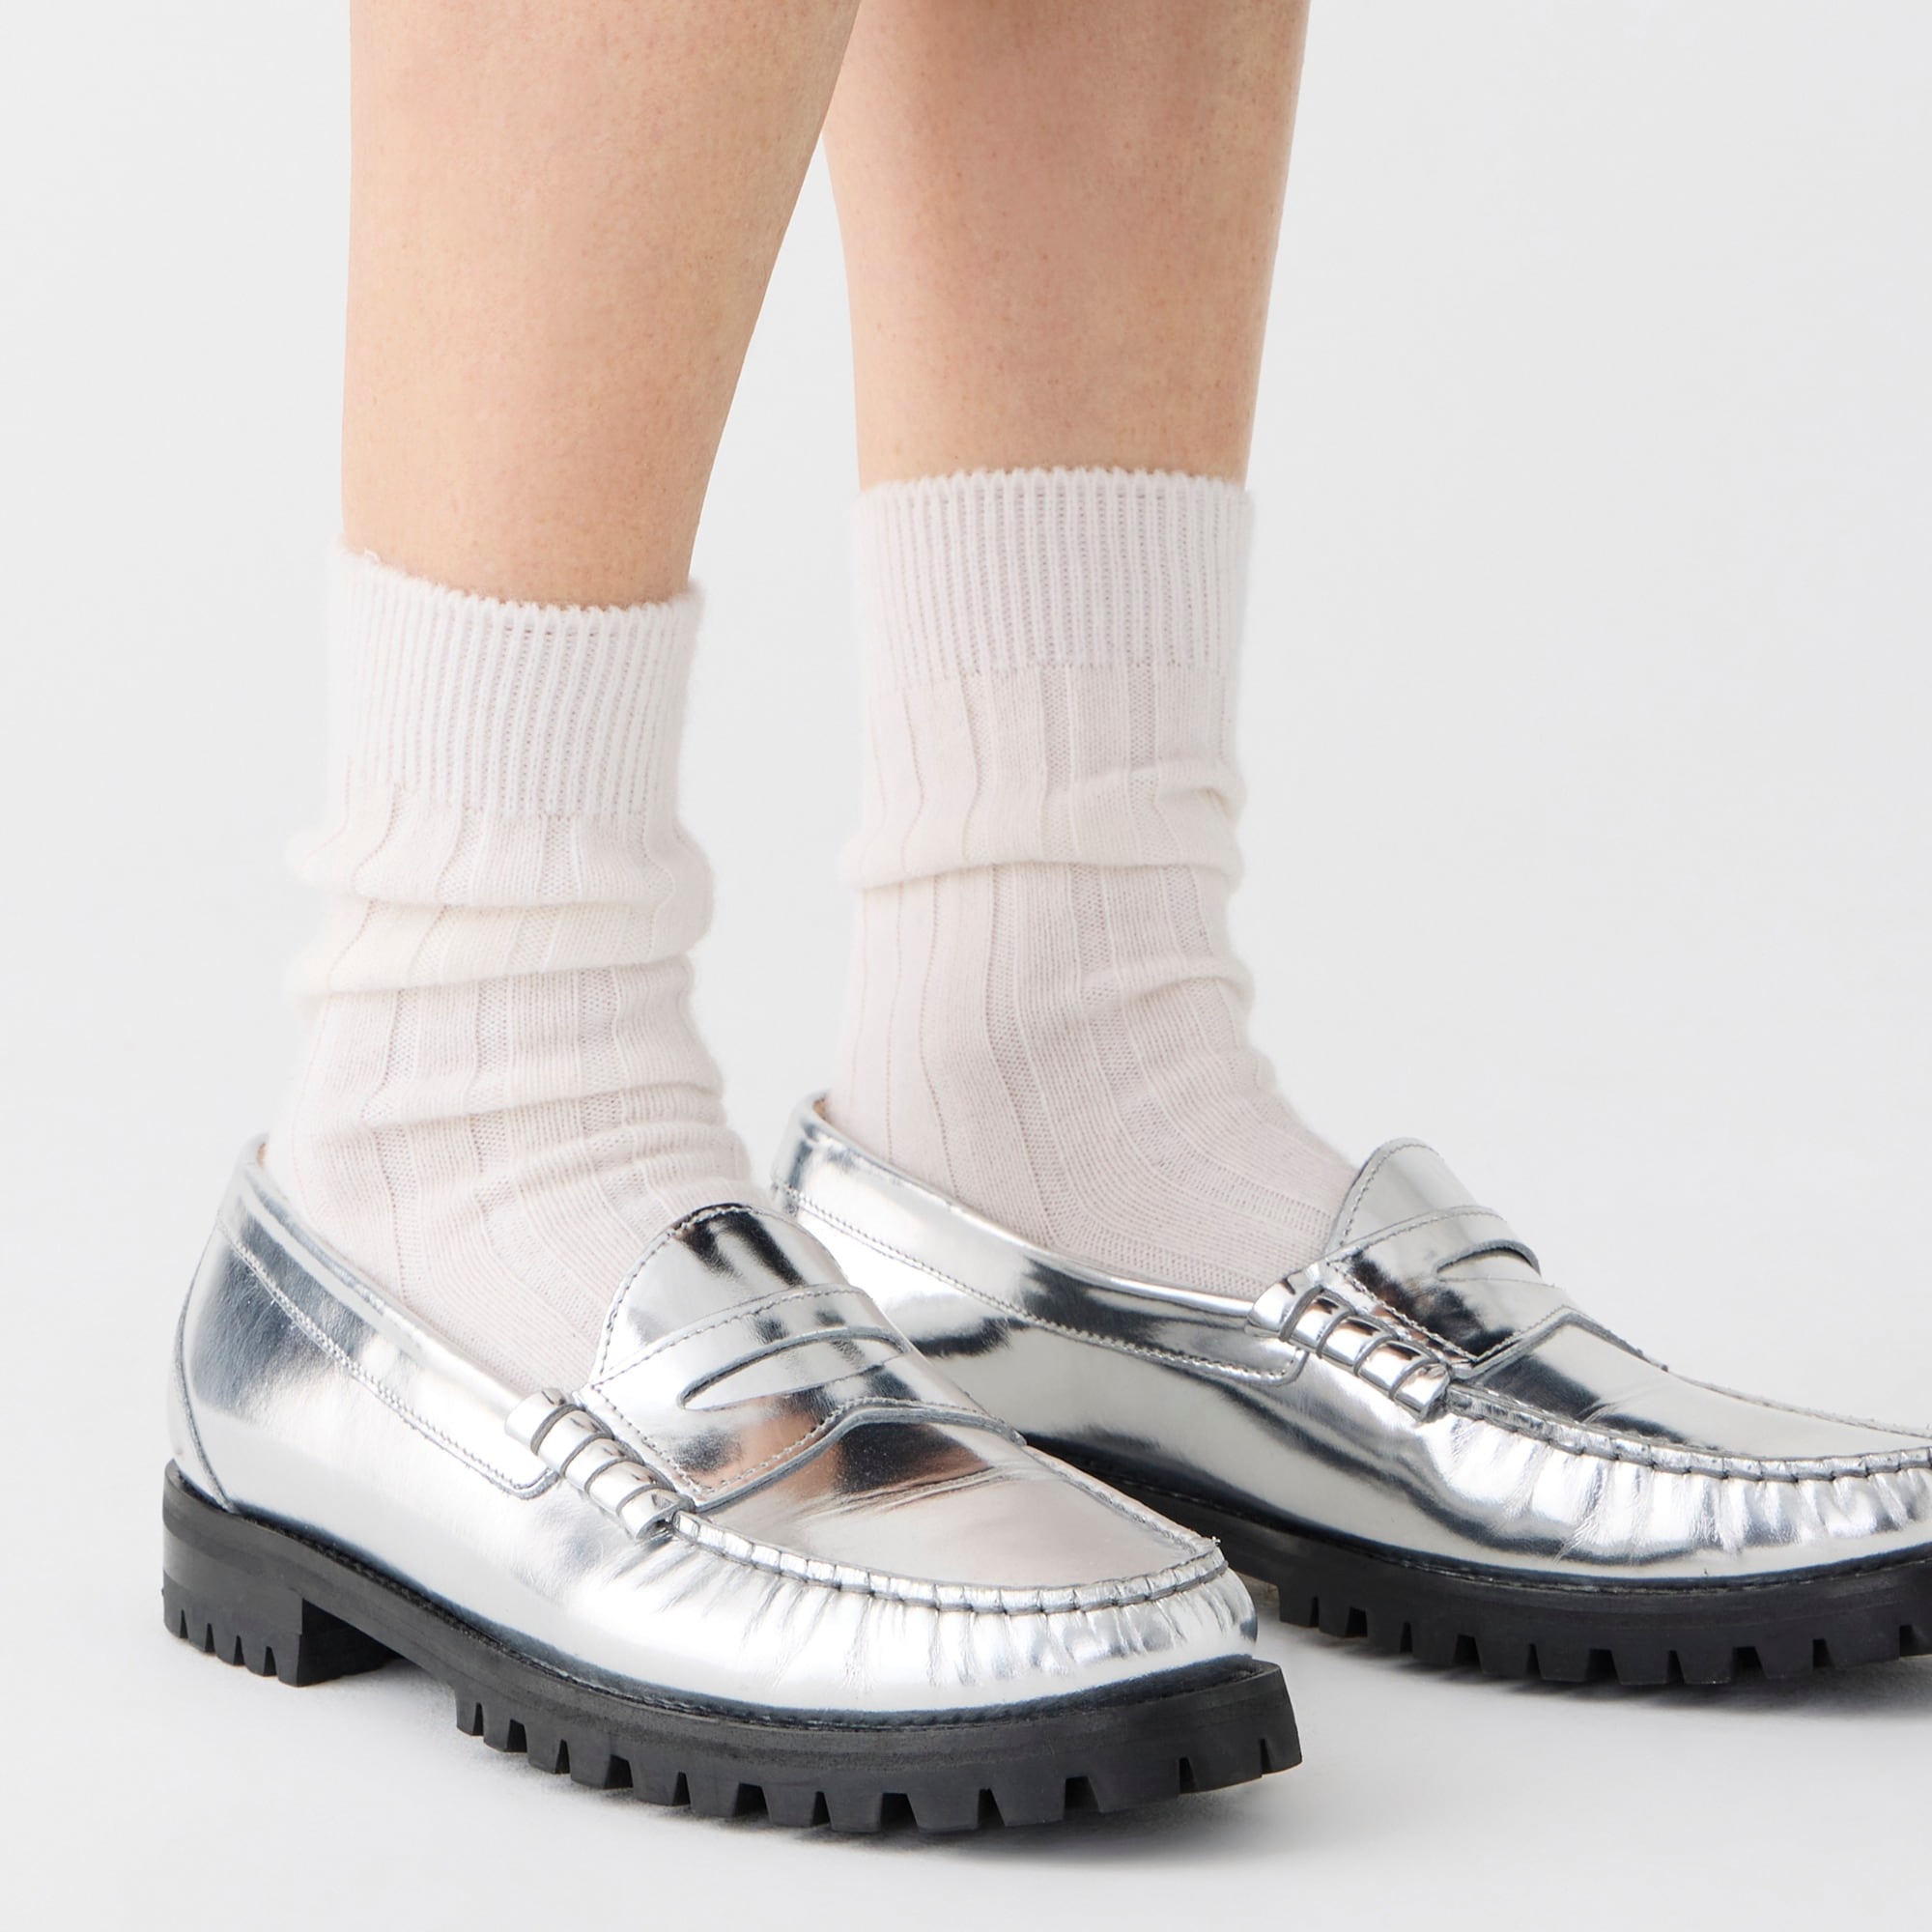  Winona lug-sole penny loafers in metallic leather